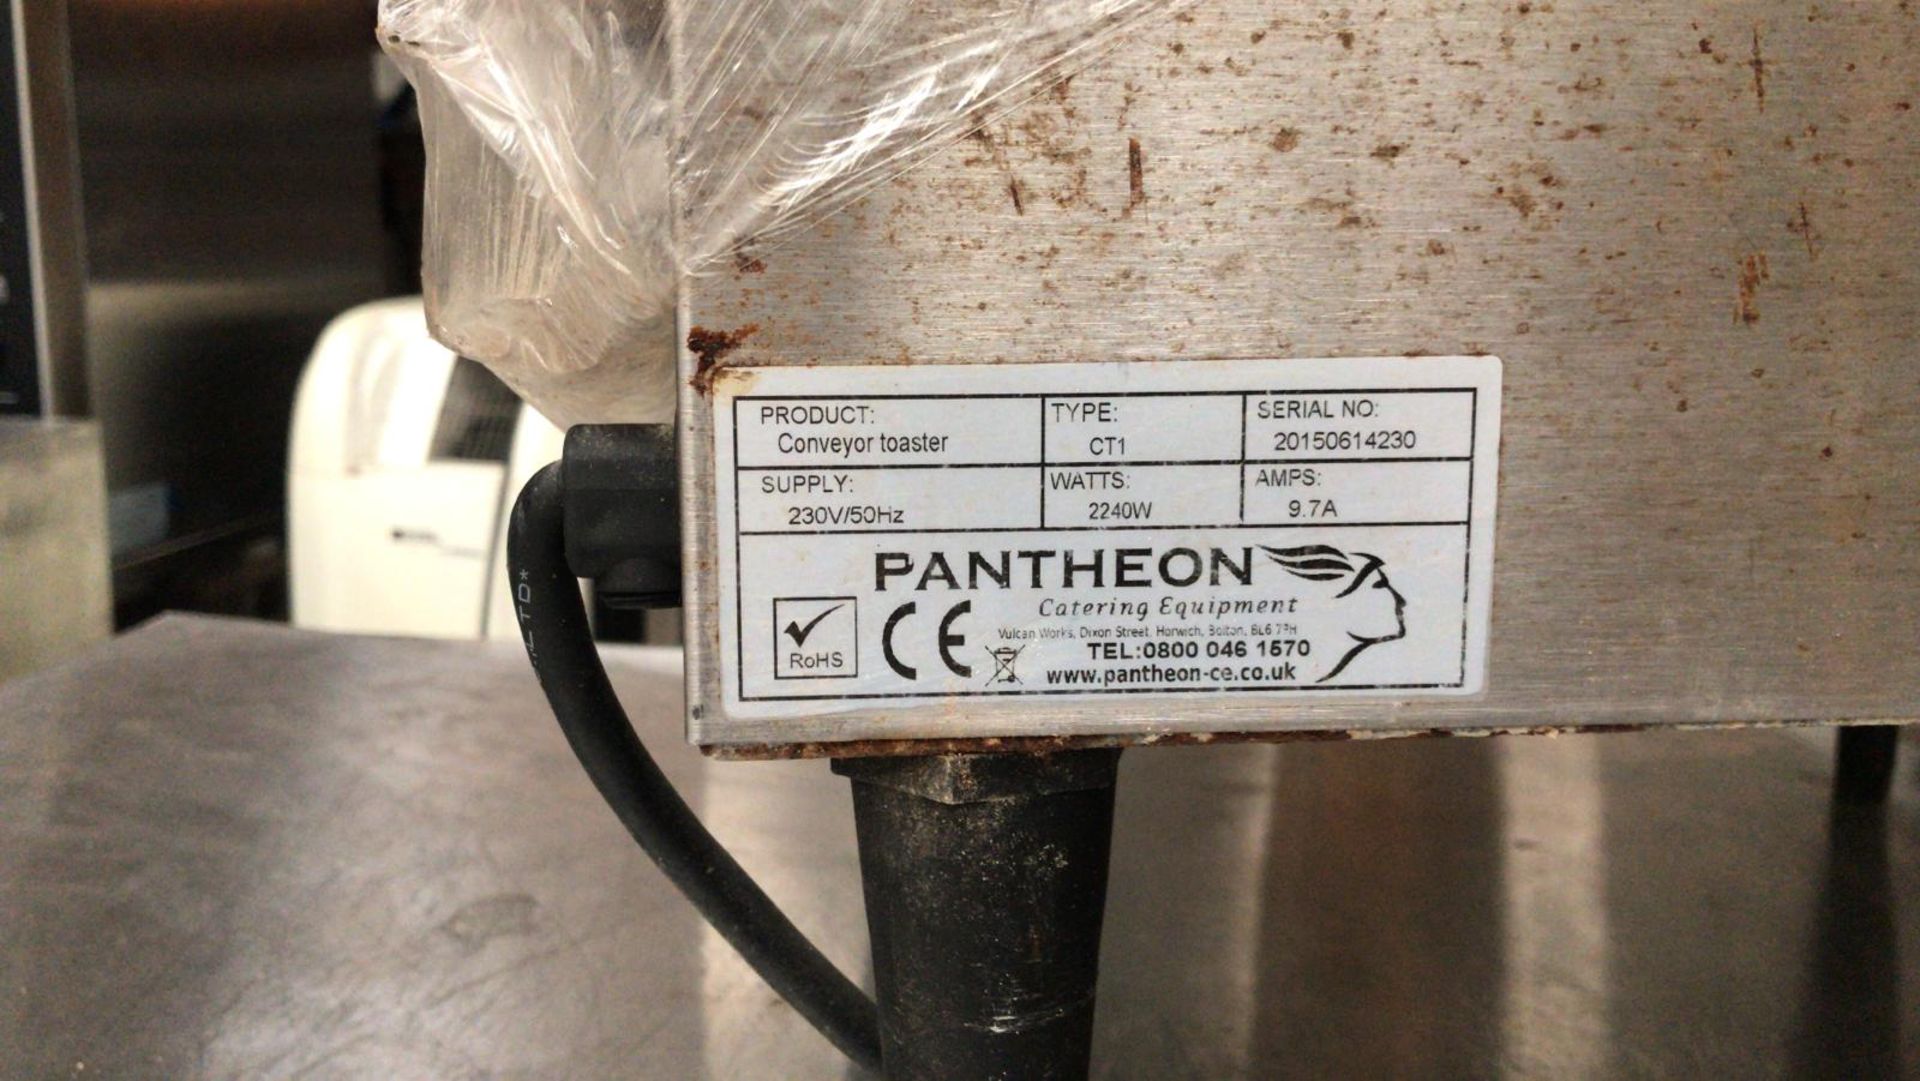 Pantheon Counter Top Stainless Steel Conveyor Toaster - Image 3 of 3